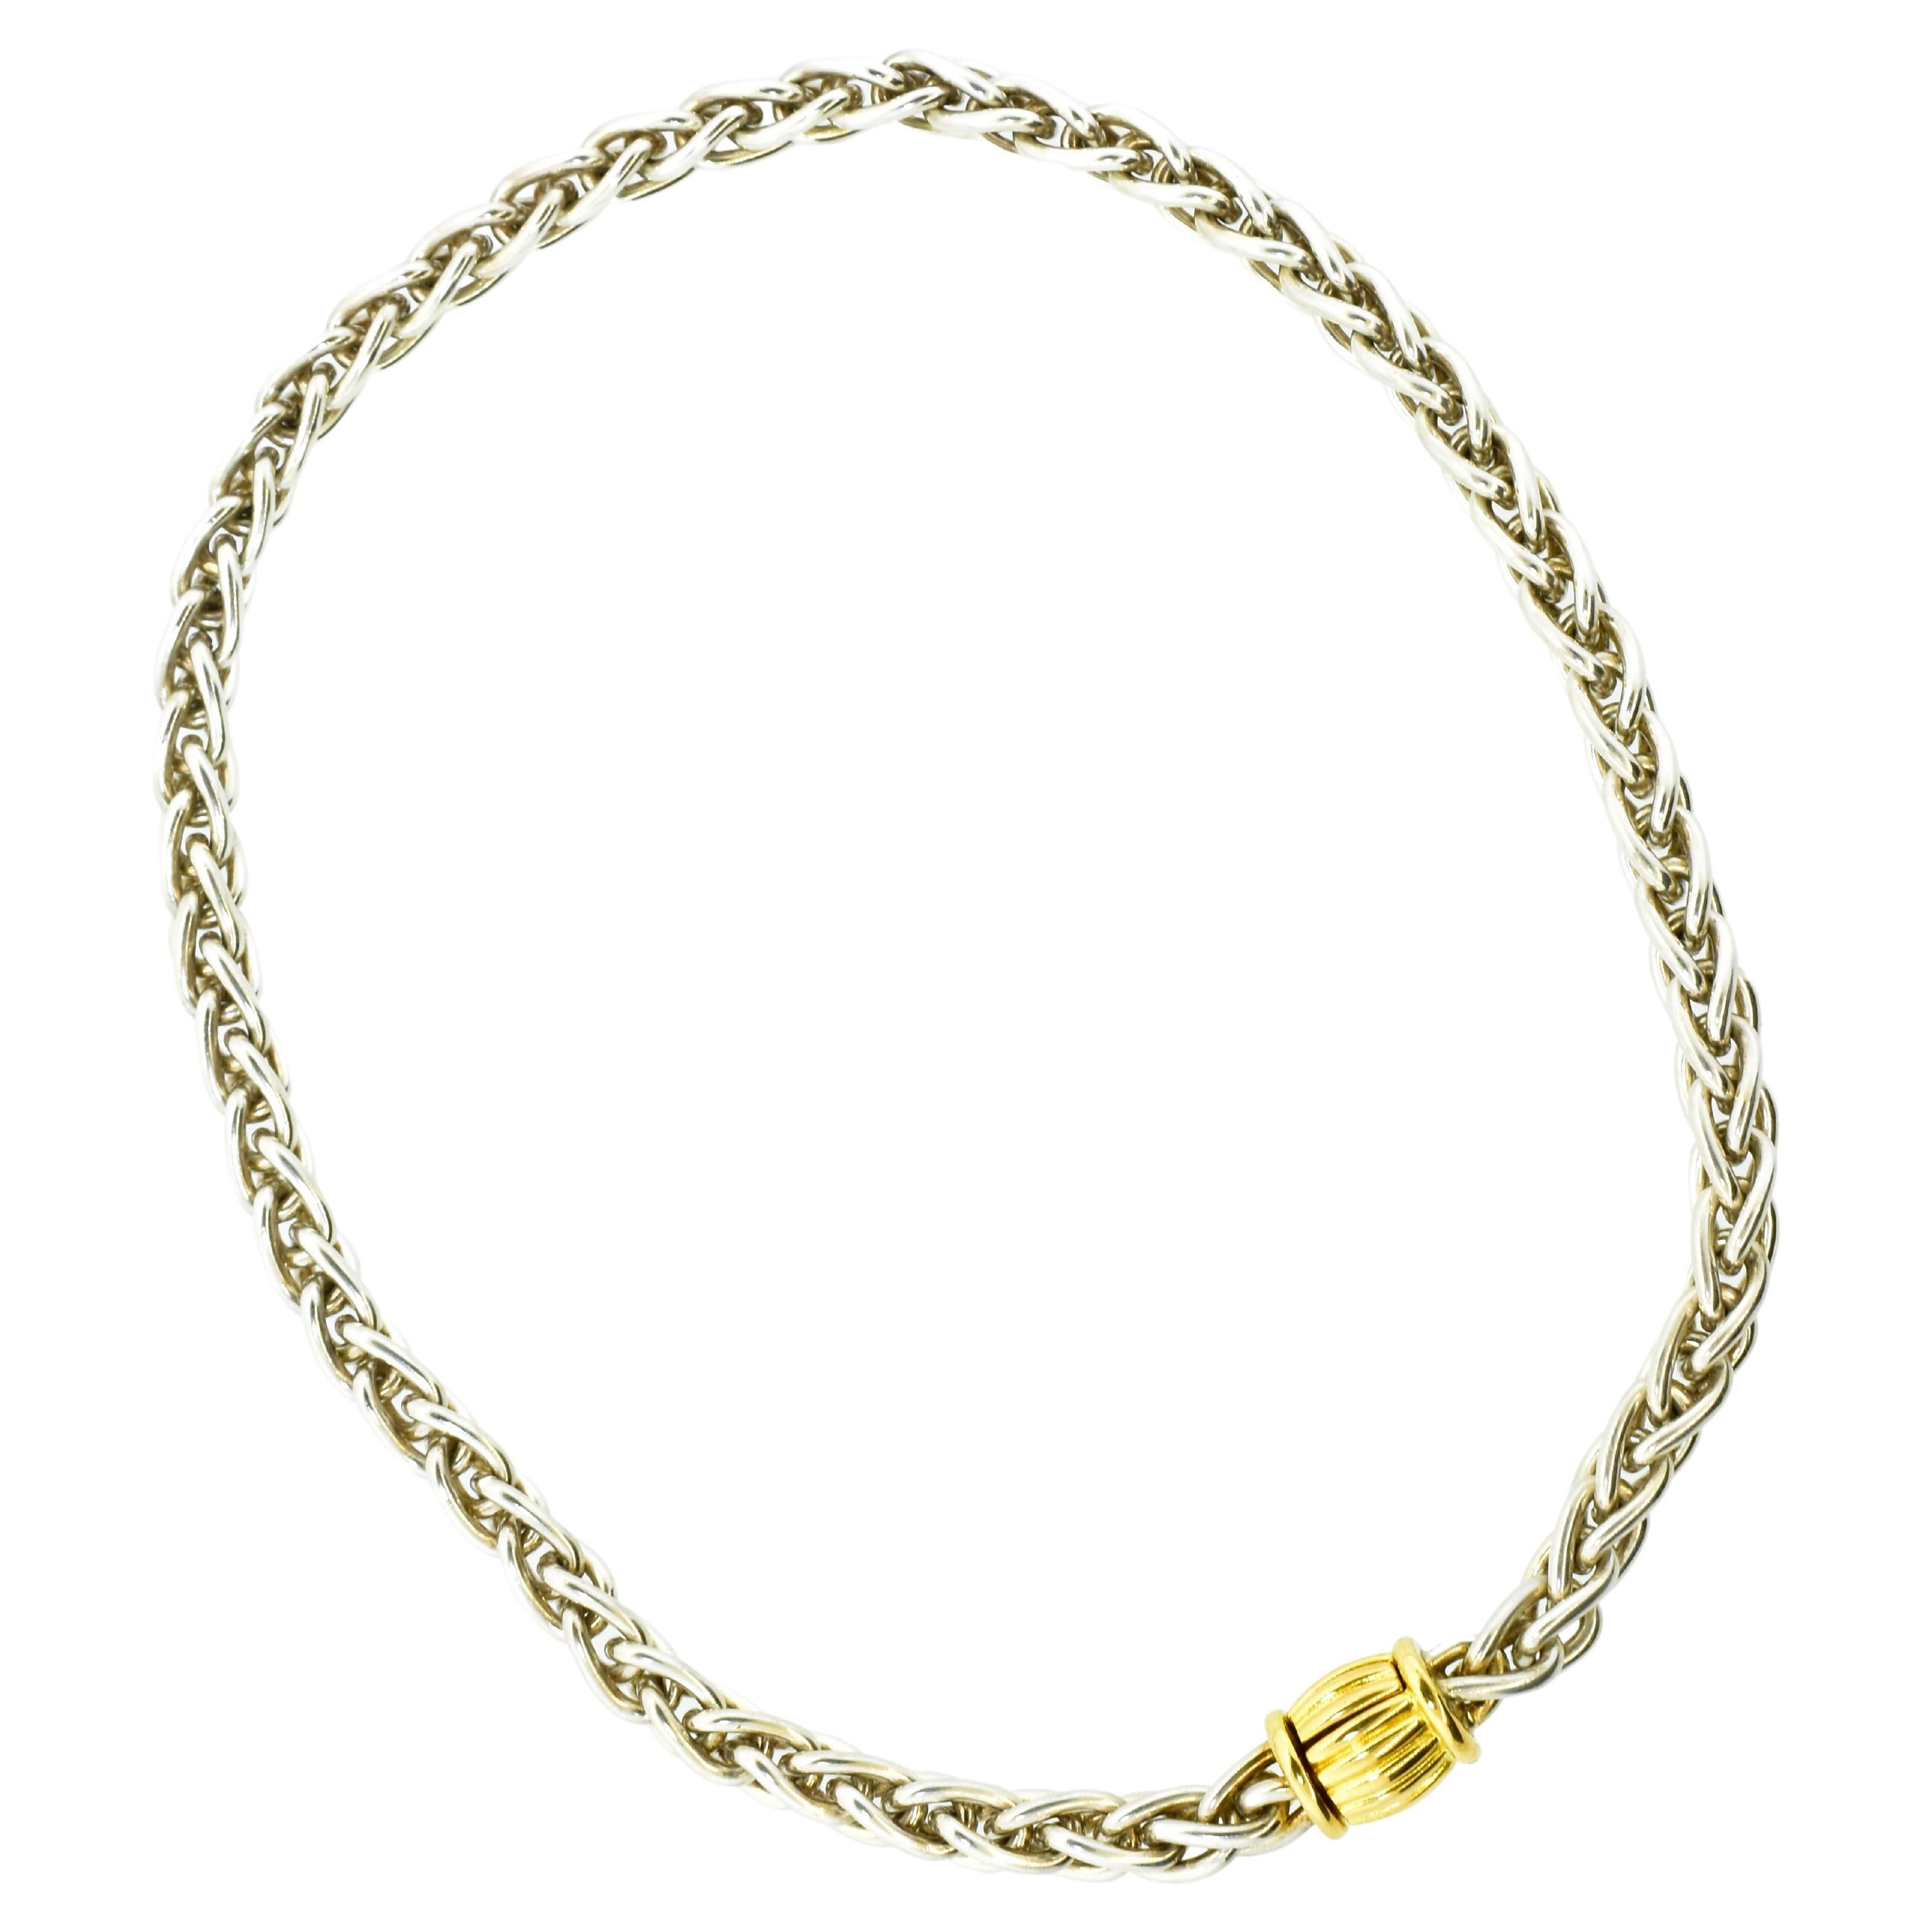 Hermes Paris 18k Yellow Gold and Sterling Silver Necklace, circa 1995 For Sale